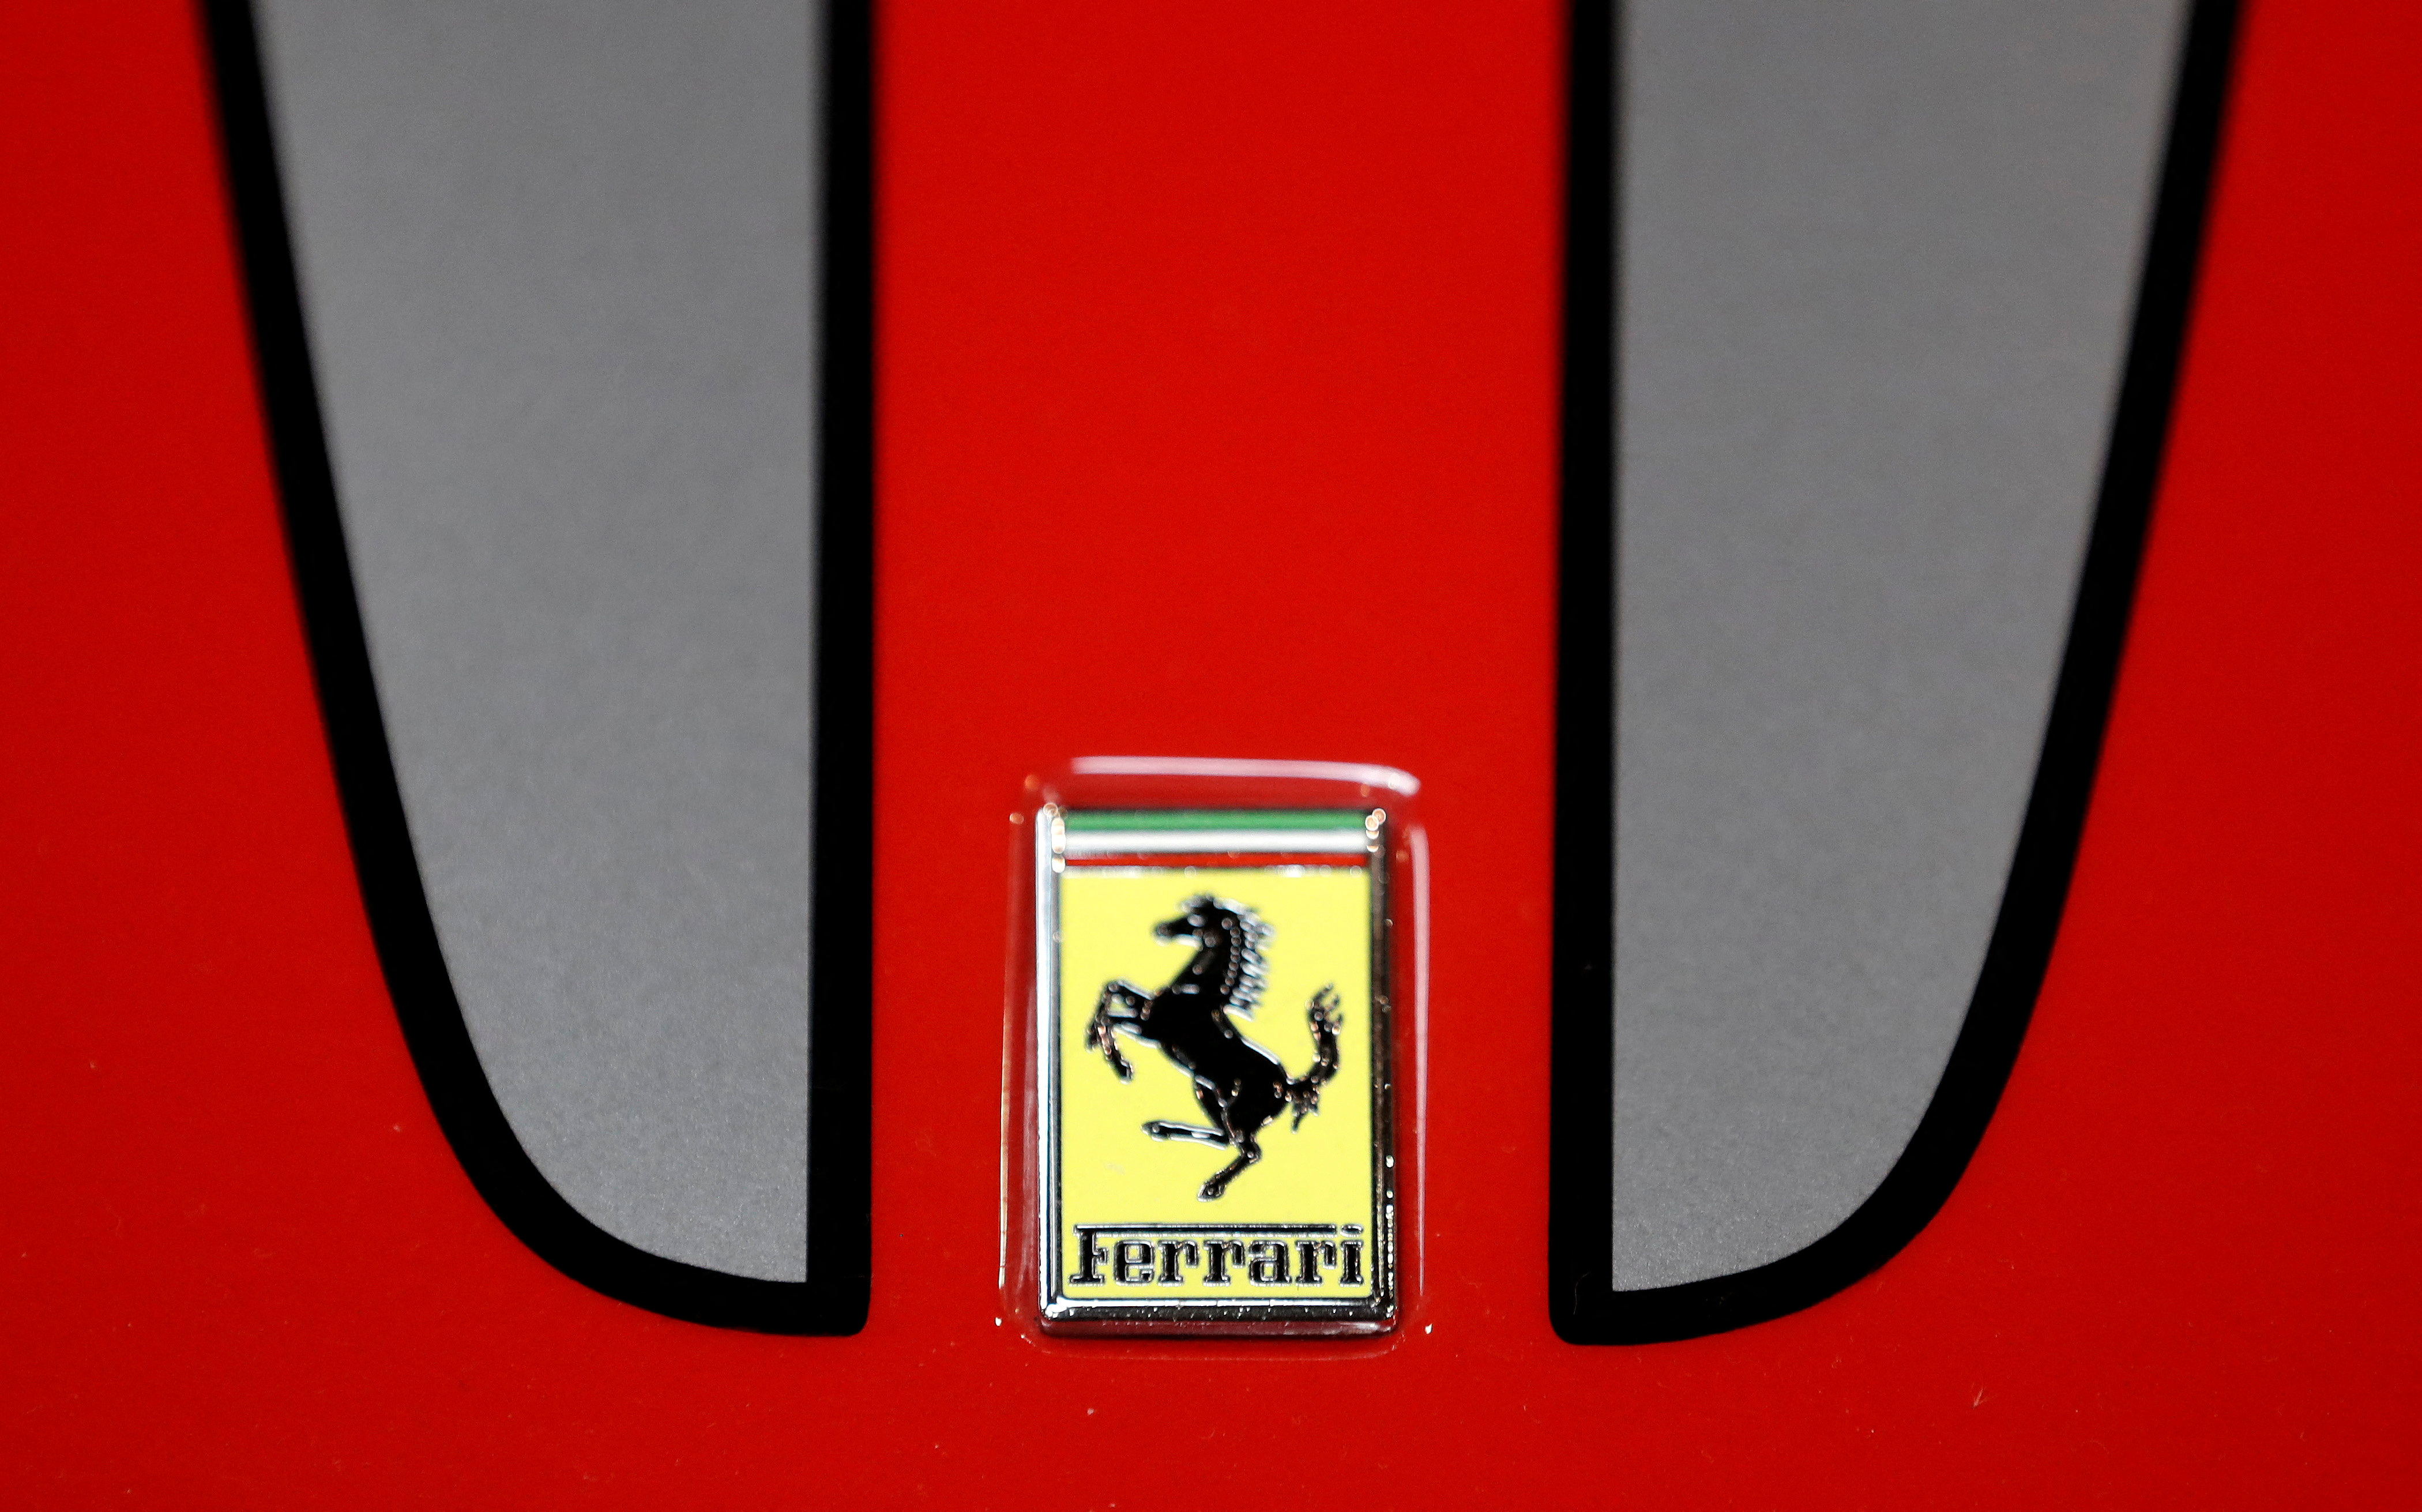 The logo of Ferrari is seen on a car during the Prague Autoshow in Prague